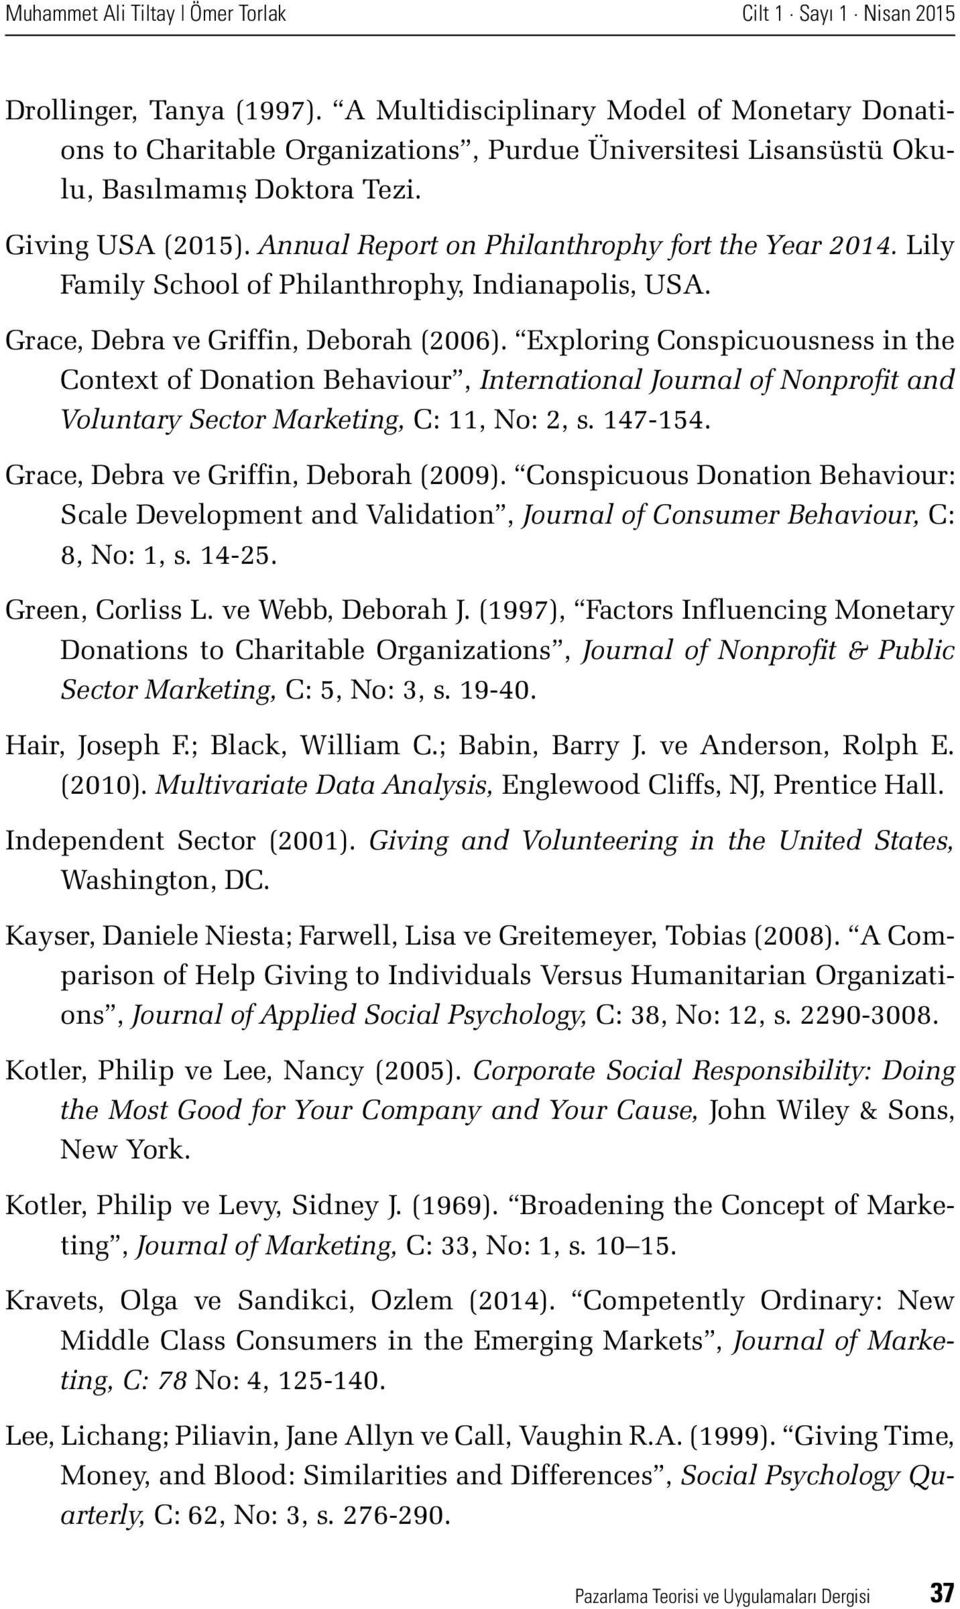 Exploring Conspicuousness in the Context of Donation Behaviour, International Journal of Nonprofit and Voluntary Sector Marketing, C: 11, No: 2, s. 147-154. Grace, Debra ve Griffin, Deborah (2009).